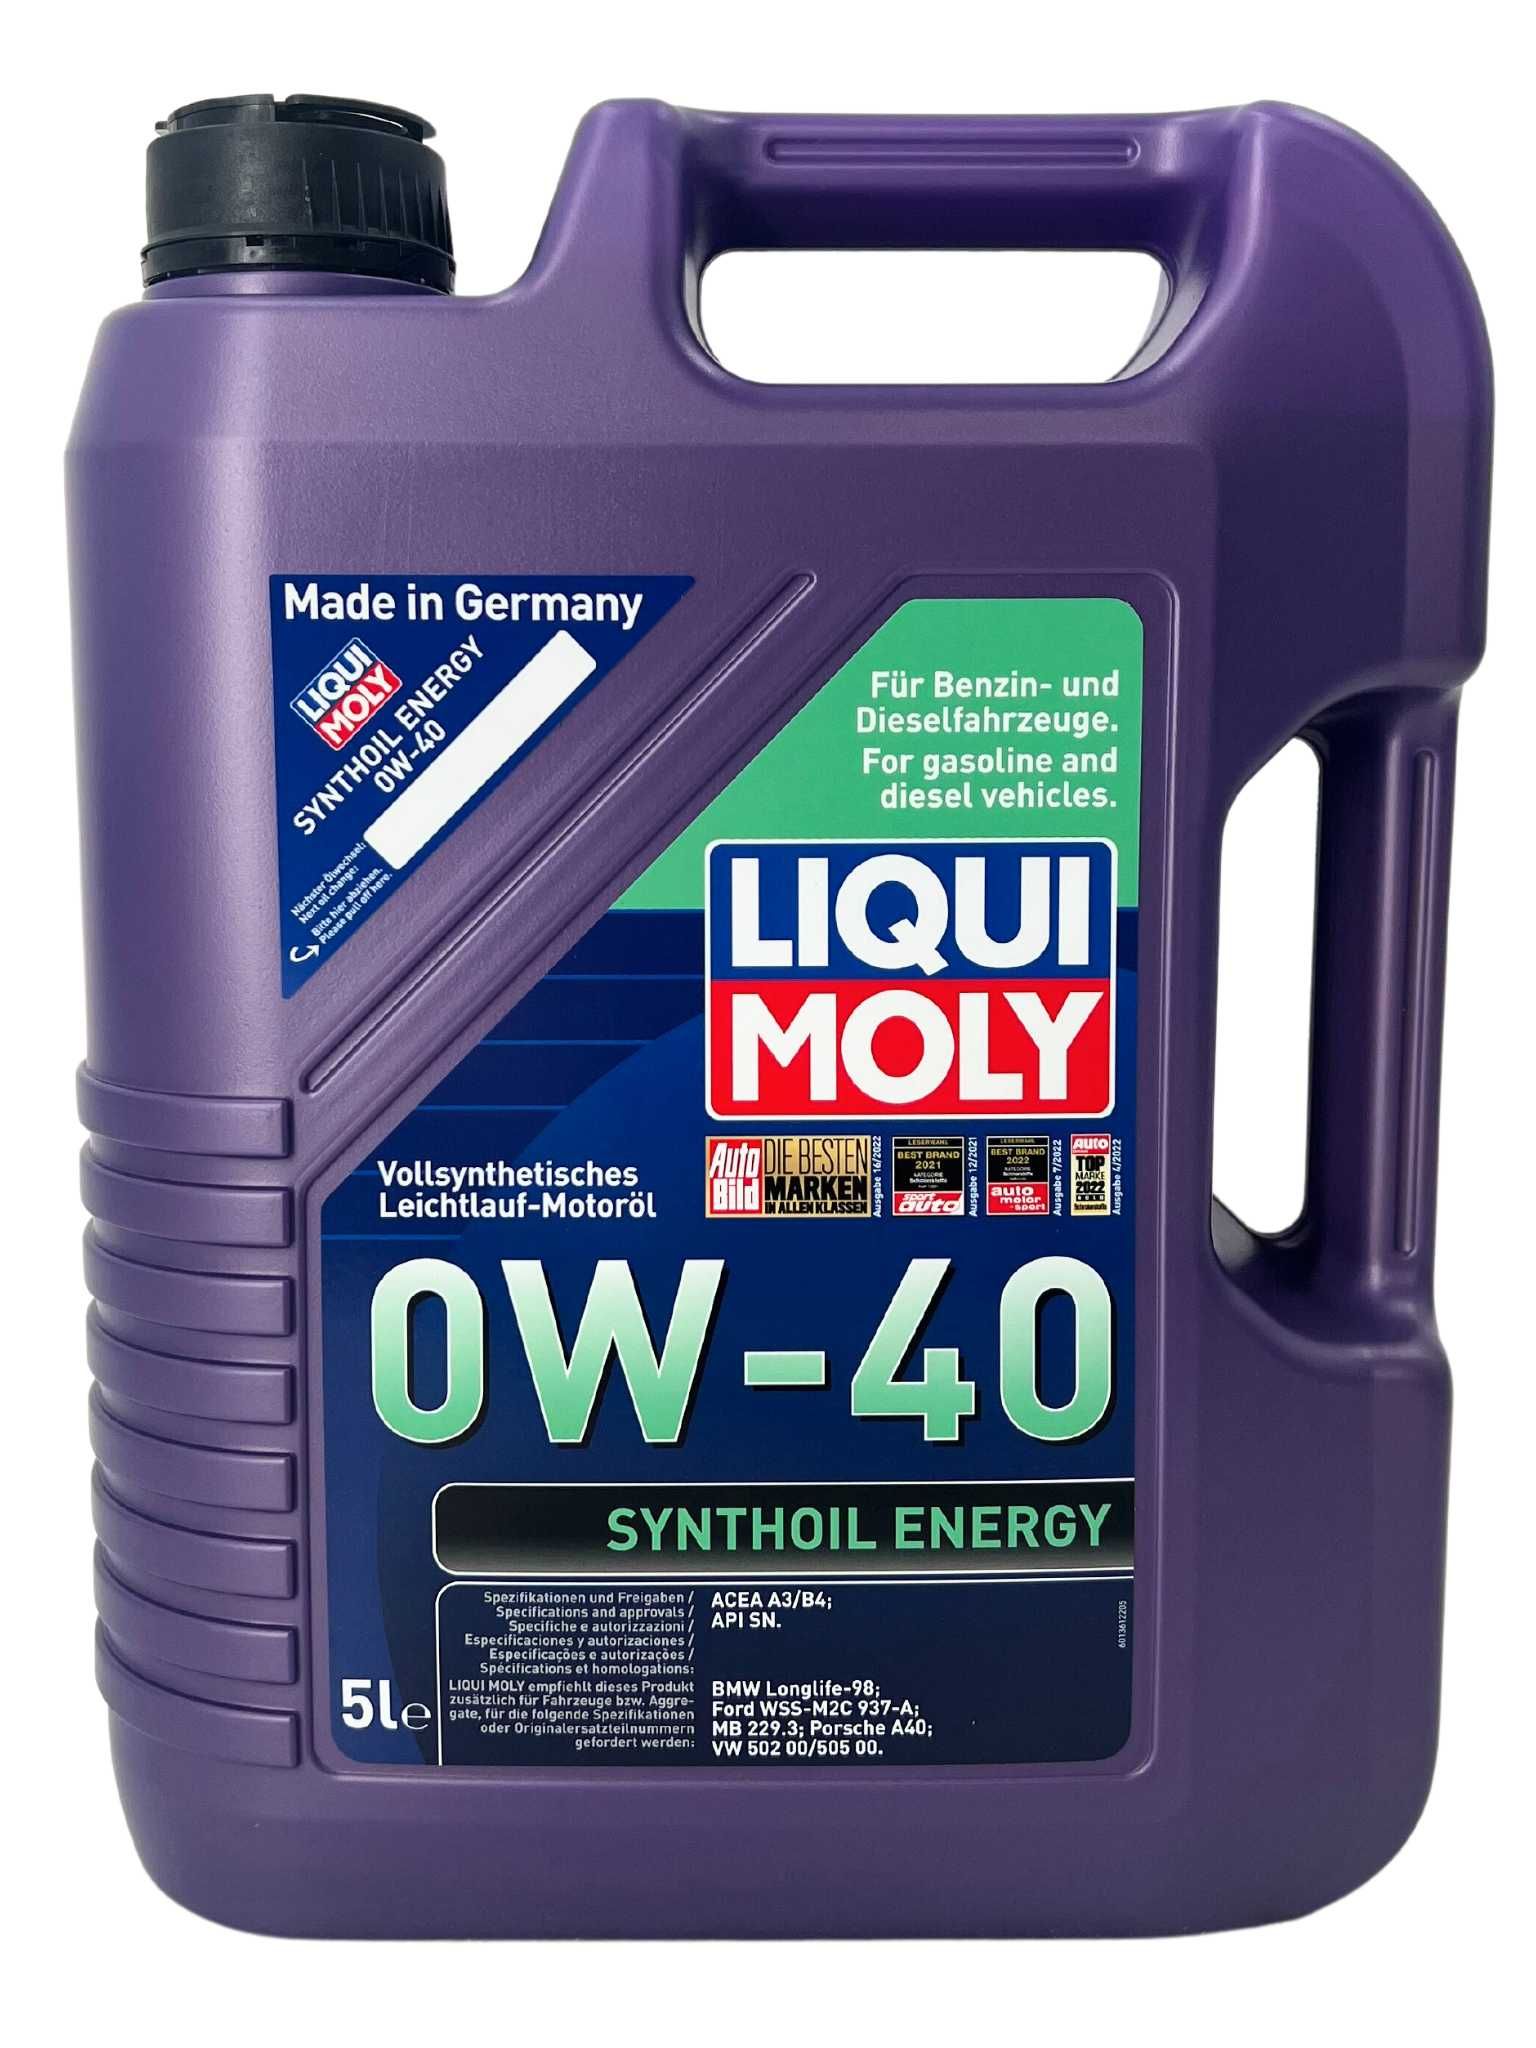 Liqui Moly Synthoil Energy 0W-40 5 Liter